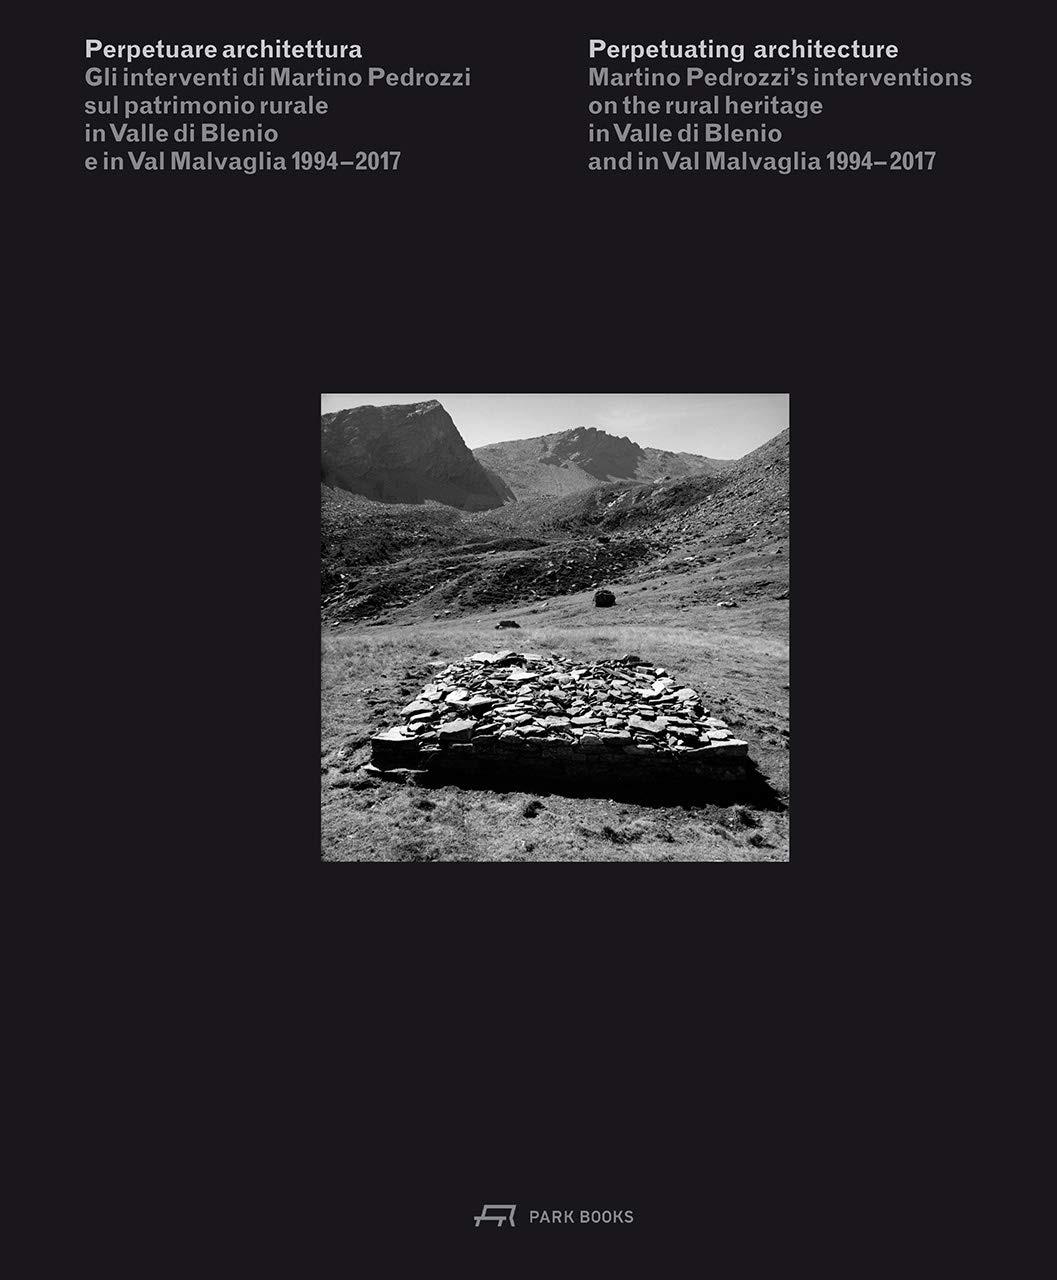 PERPETUATING ARCHITECTURE. MARTINO PEDROZZI'S INTERVENTIONS ON THE RURAL HERITAGE IN VALLE DI BLENIO  "HERITAGE IN VALLE DI BLENIO AND IN VAL MALVAGLIA 1994 - 2017"